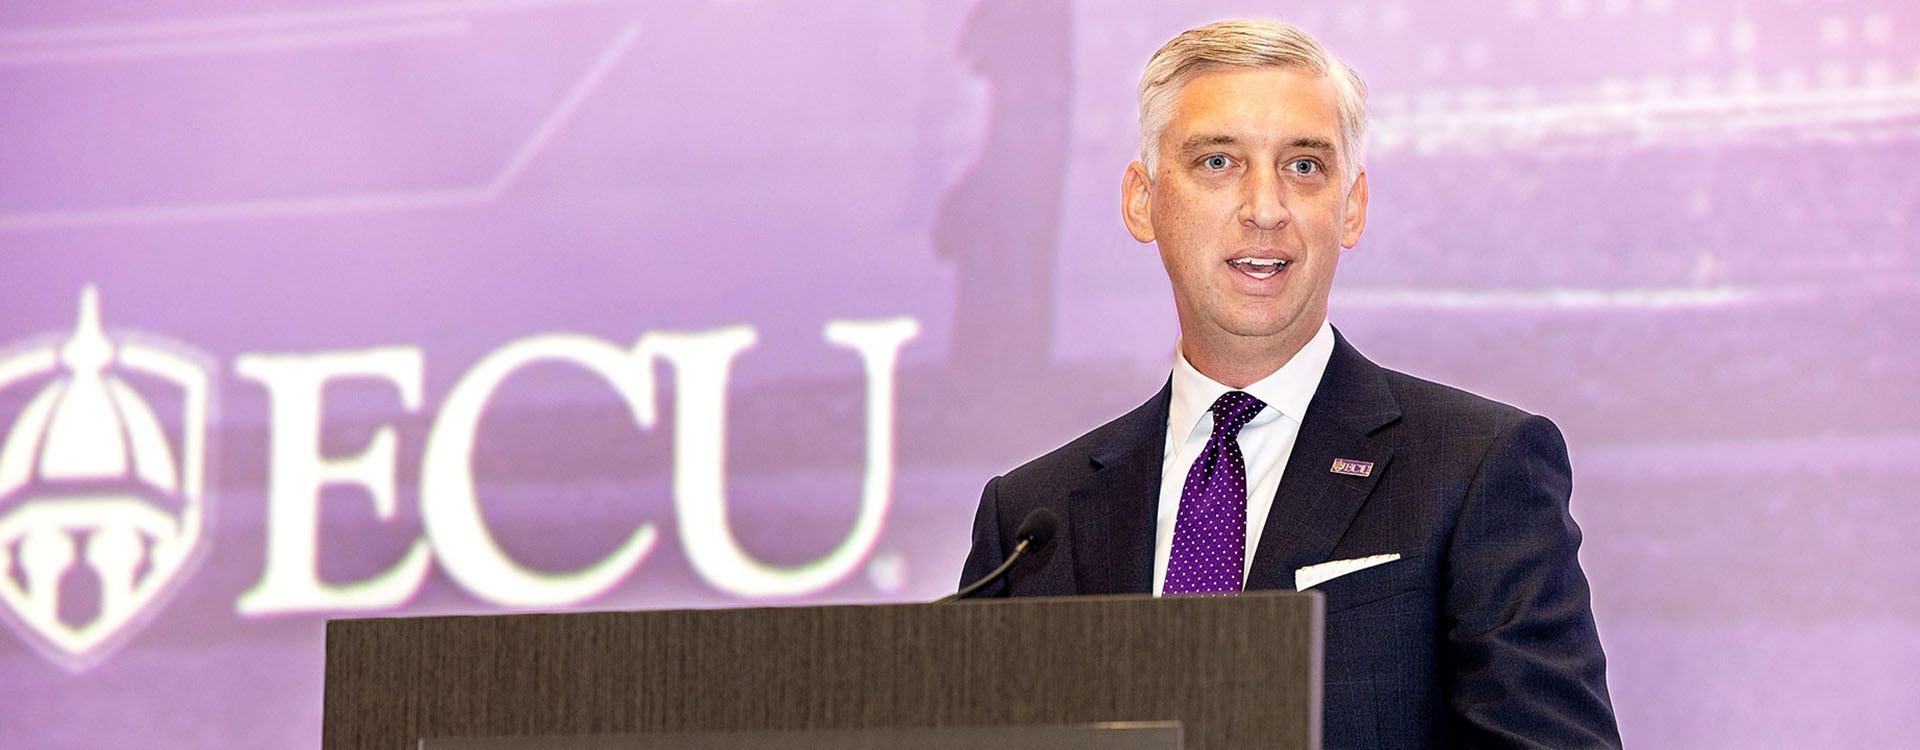 Chancellor Philip Rogers shared ECU’s priorities for the academic year within the framework of ECU’s refreshed strategic plan, Future focused. Innovation driven, during a University Day celebration on Wednesday.